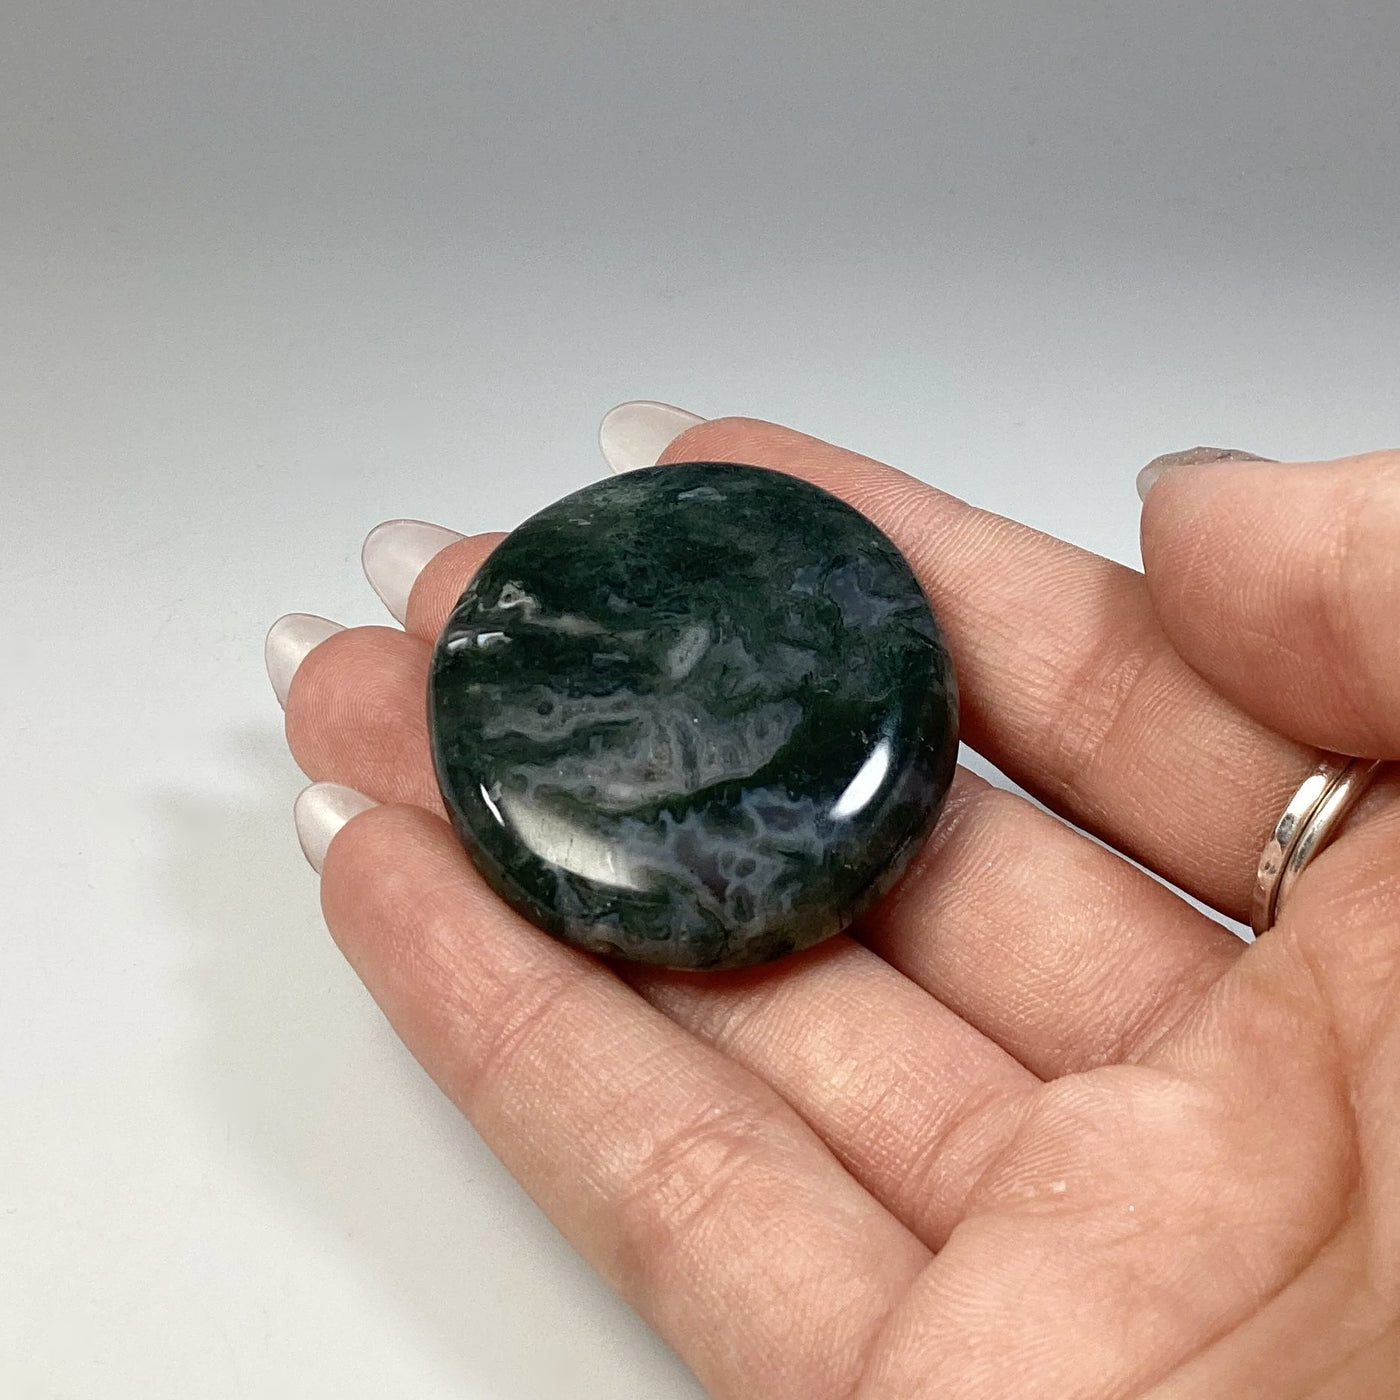 Moss Agate Touch Stone at $25 Each